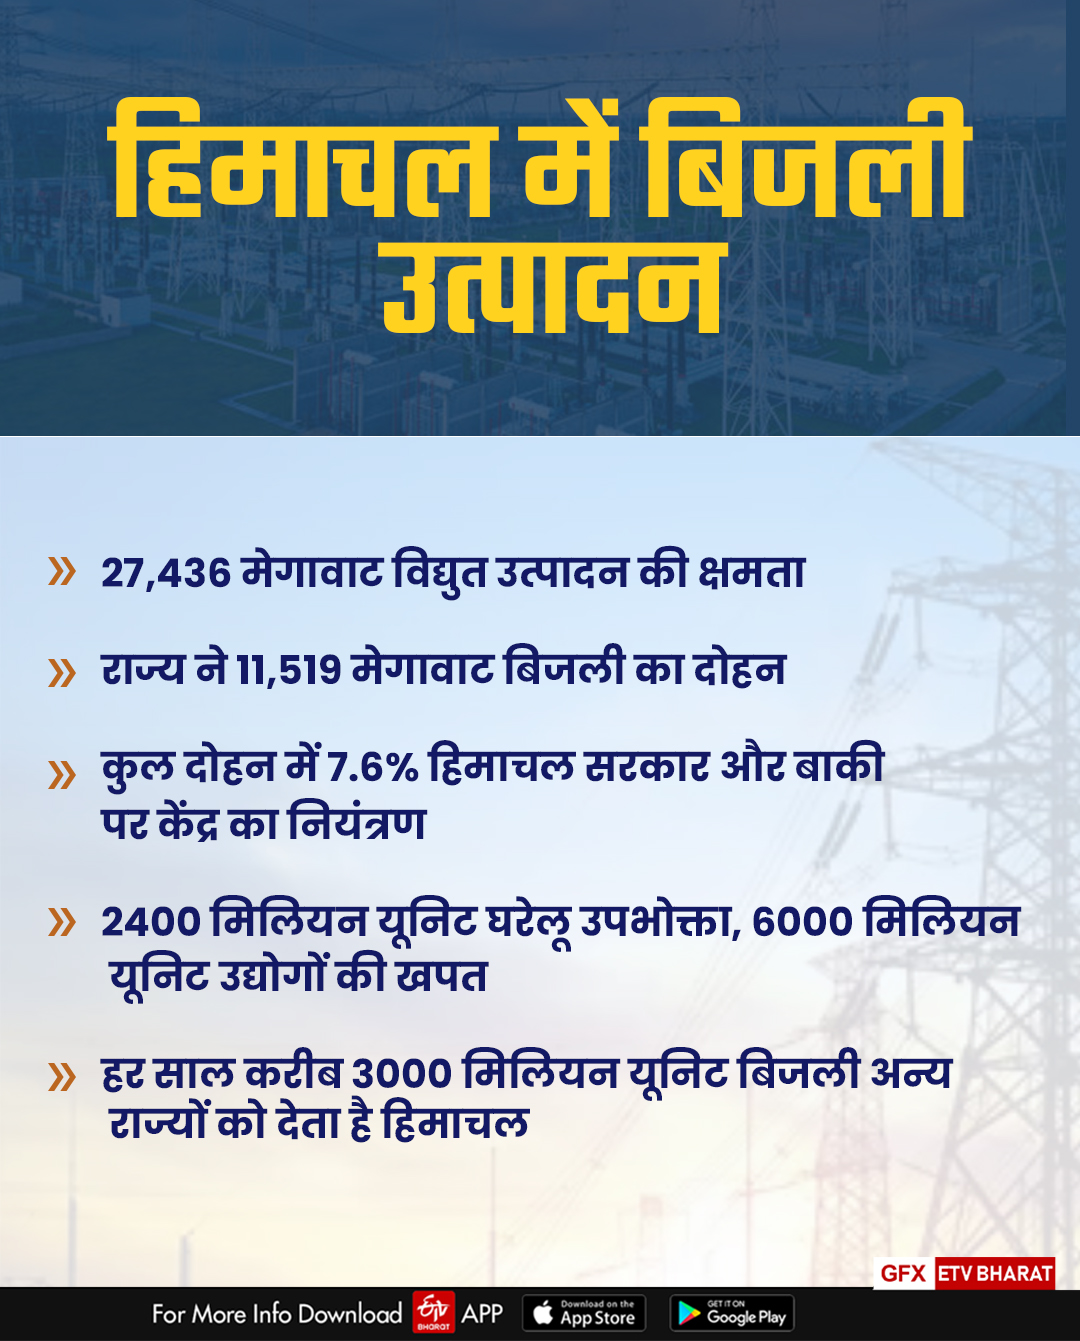 Free Electricity in himachal